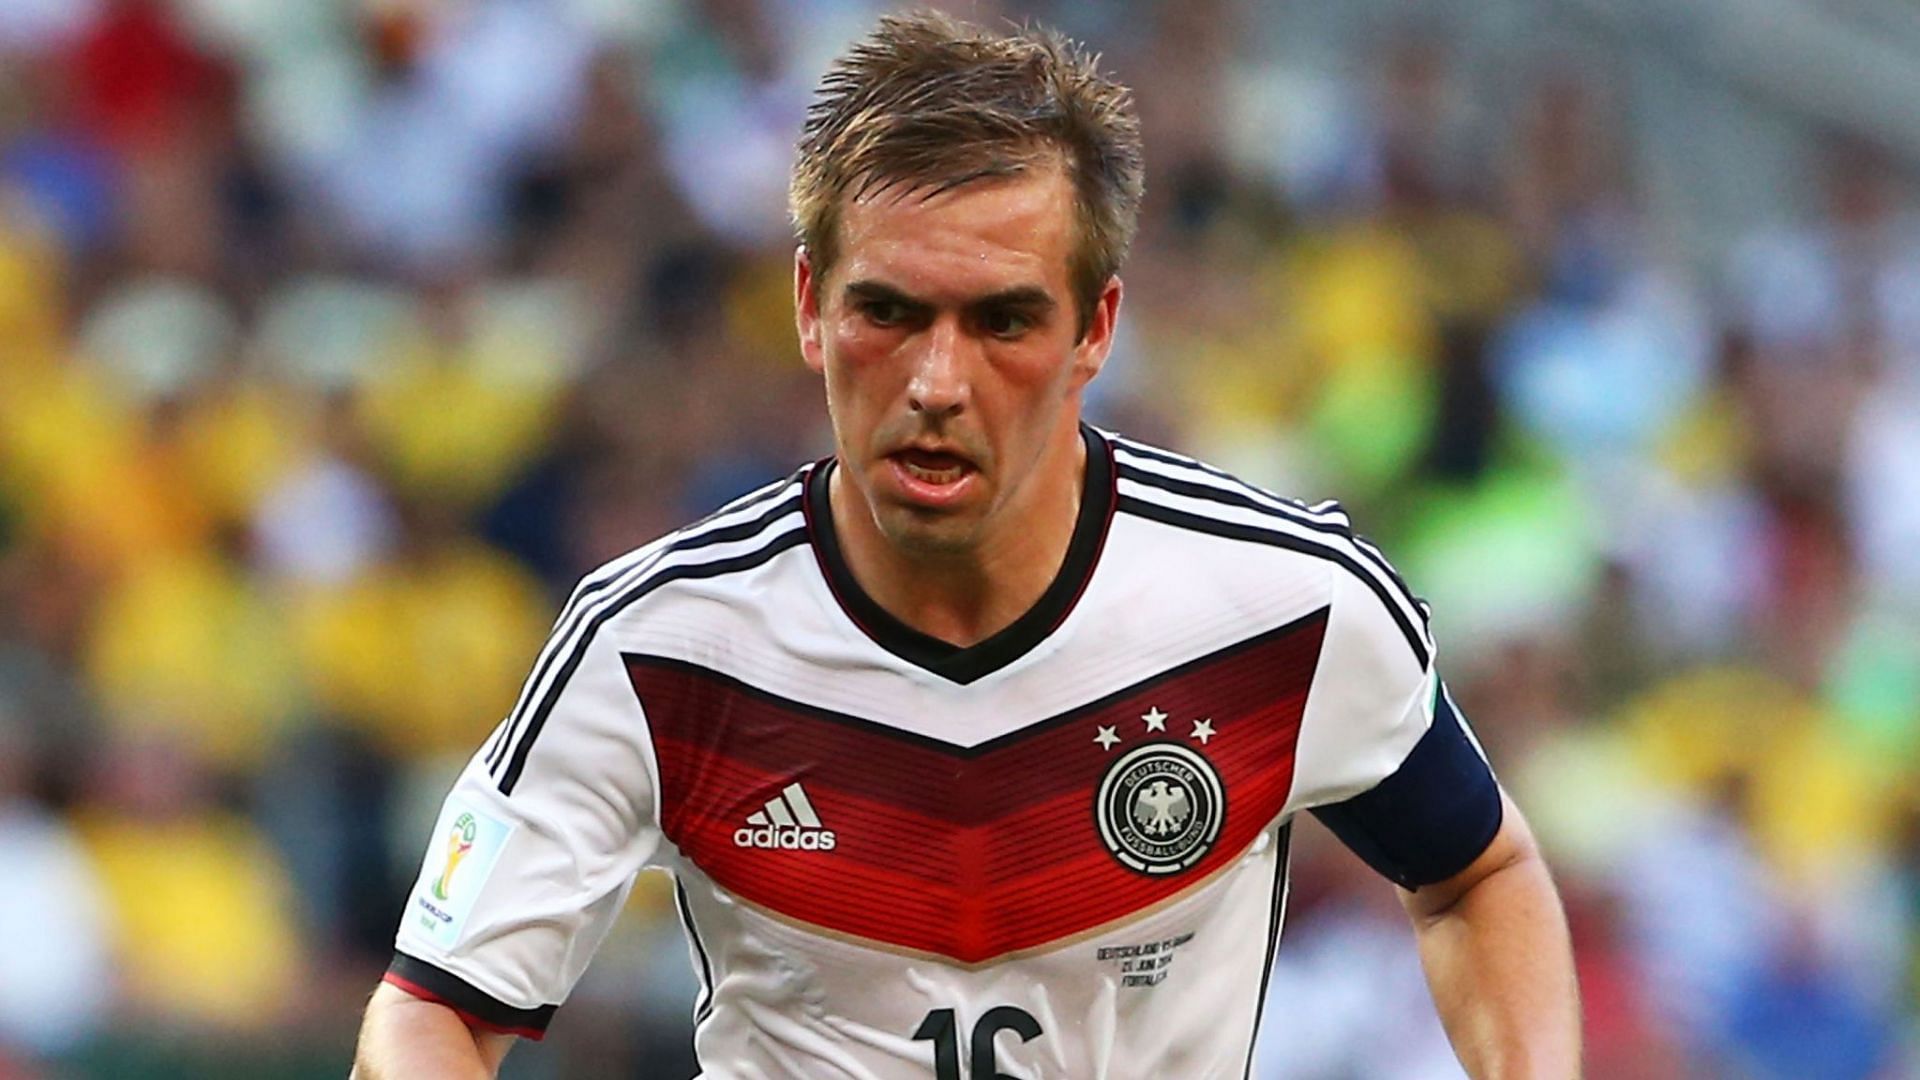 Philipp Lahm is one of the most successful German defenders to play the game/